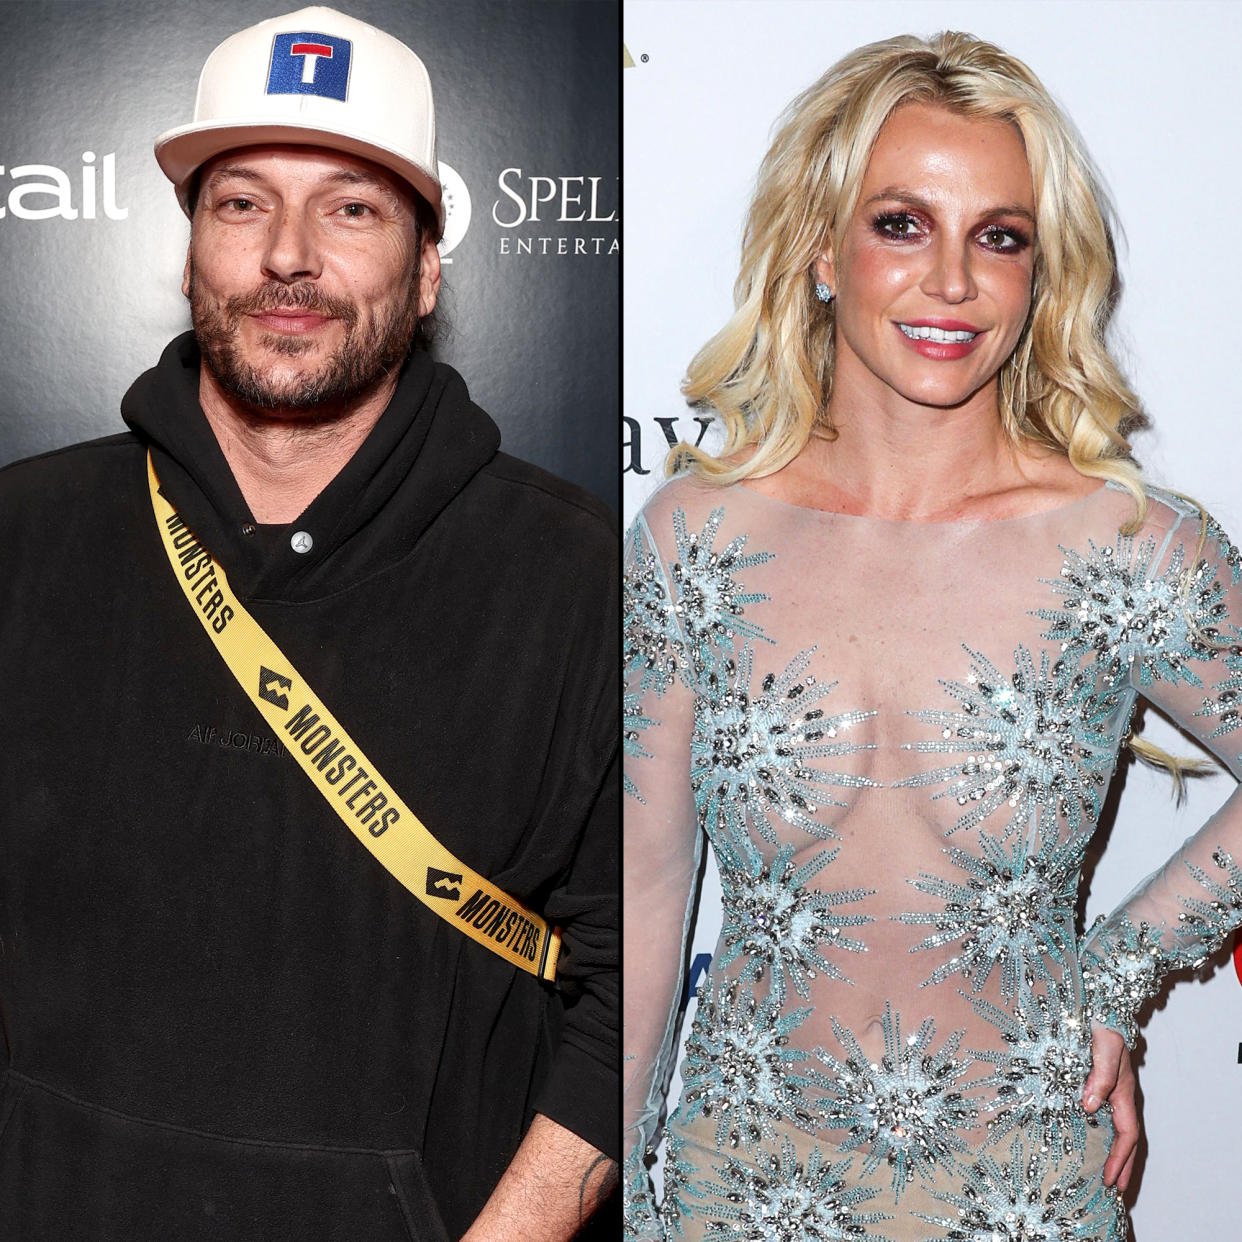 Kevin Federline Shuts Down 'Repulsive' Report That Ex-Wife Britney Spears Is On Drugs